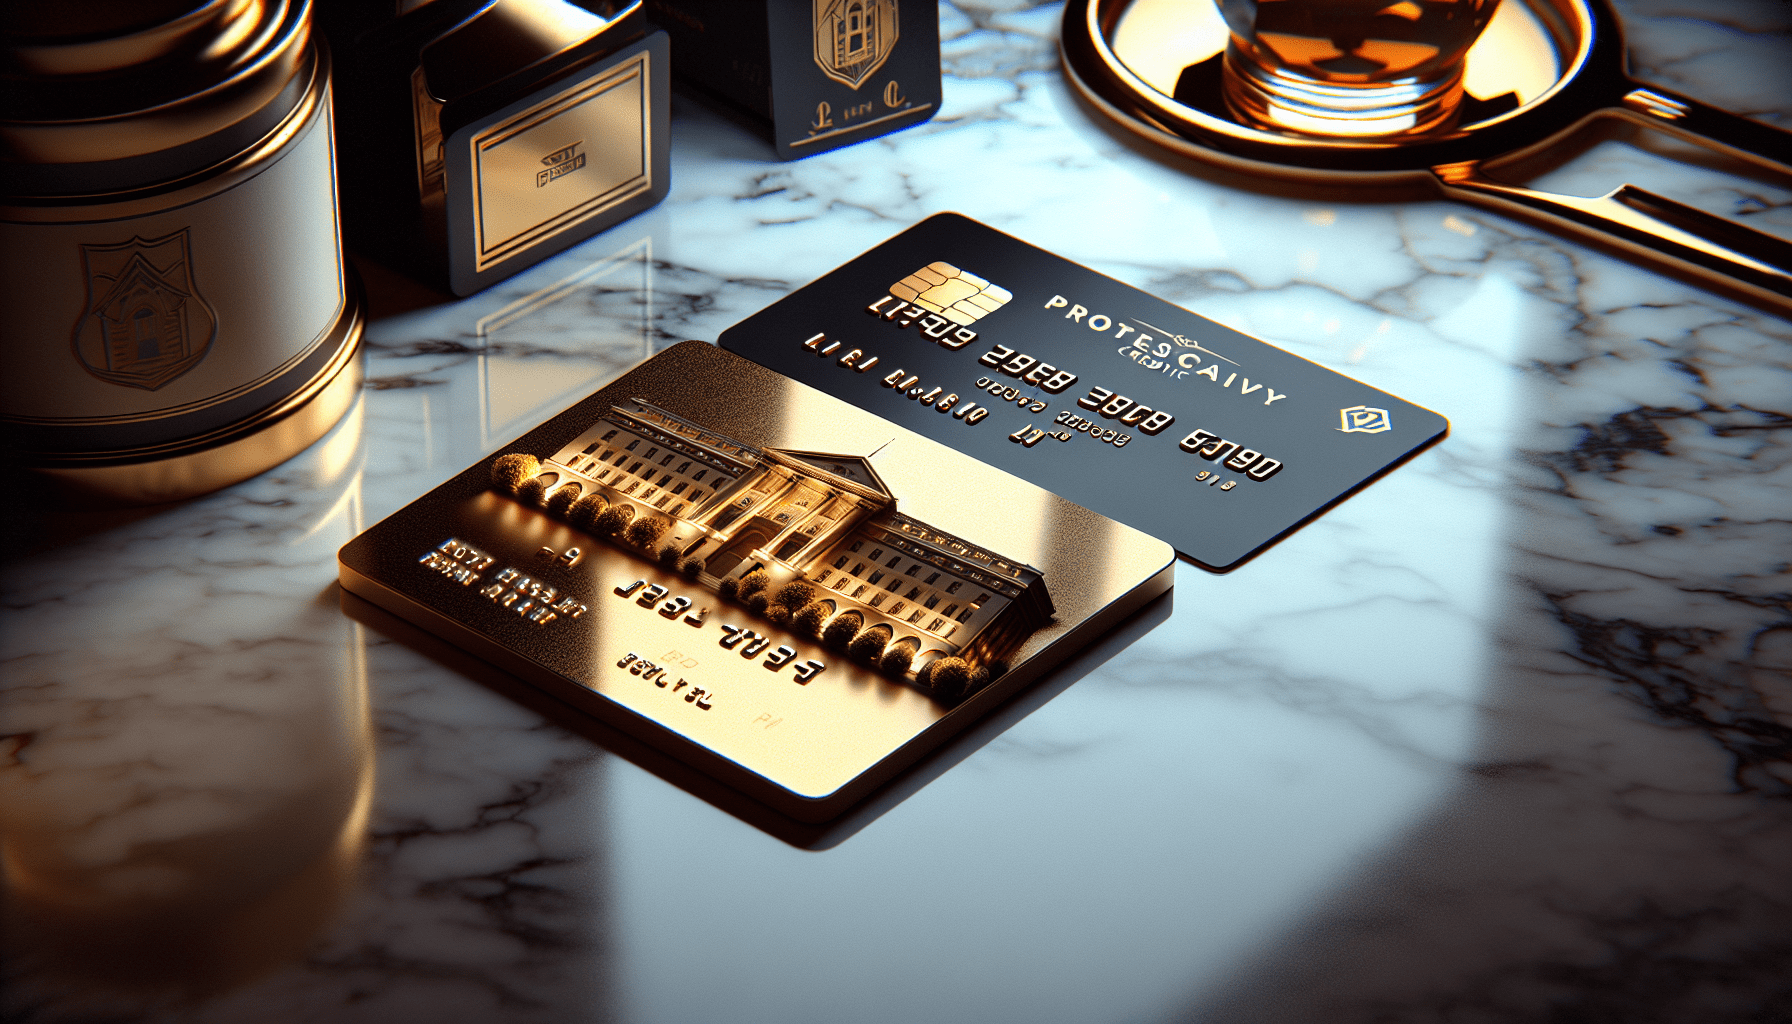 How Do I Enroll In Hilton Honours With Amex Platinum?